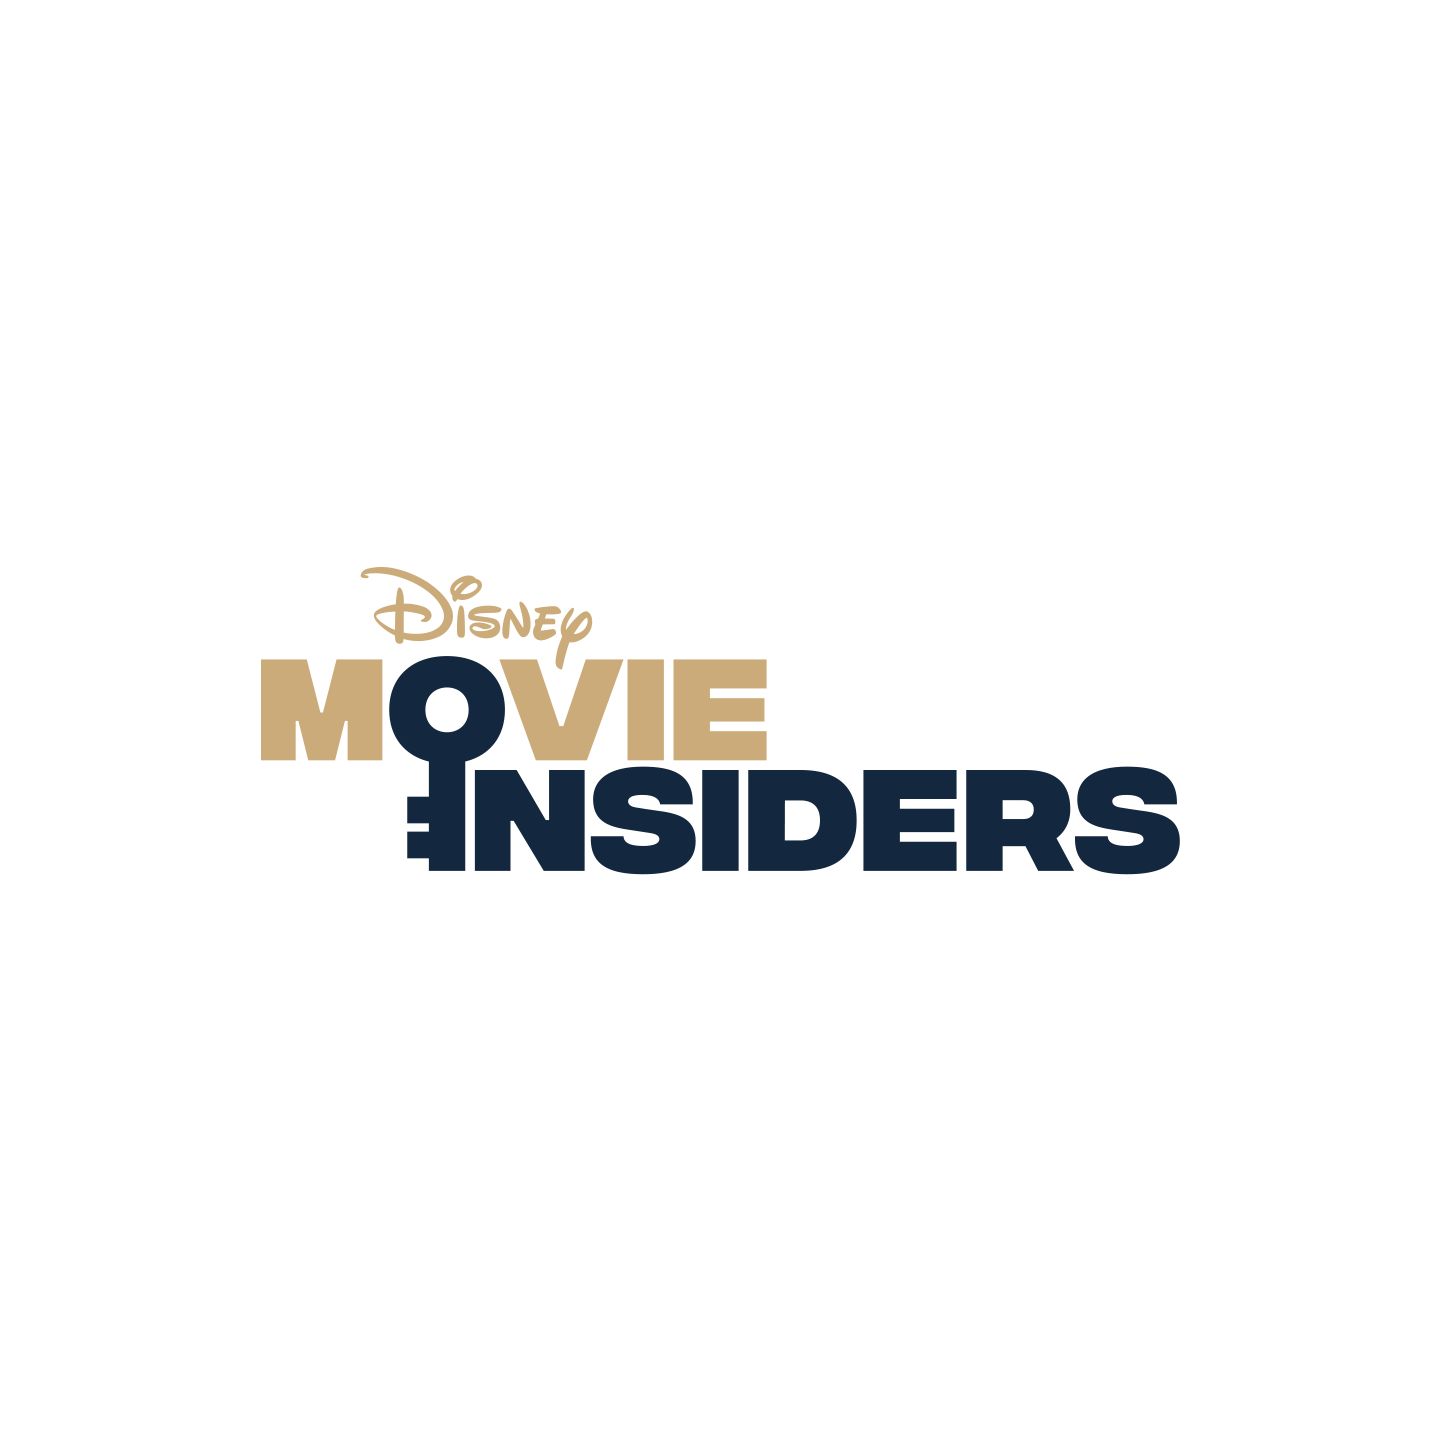 Disney Movie Insiders Presents - Seize your moment with an Insiders look at Pixar Animation Studio's Coco. LISTEN NOW